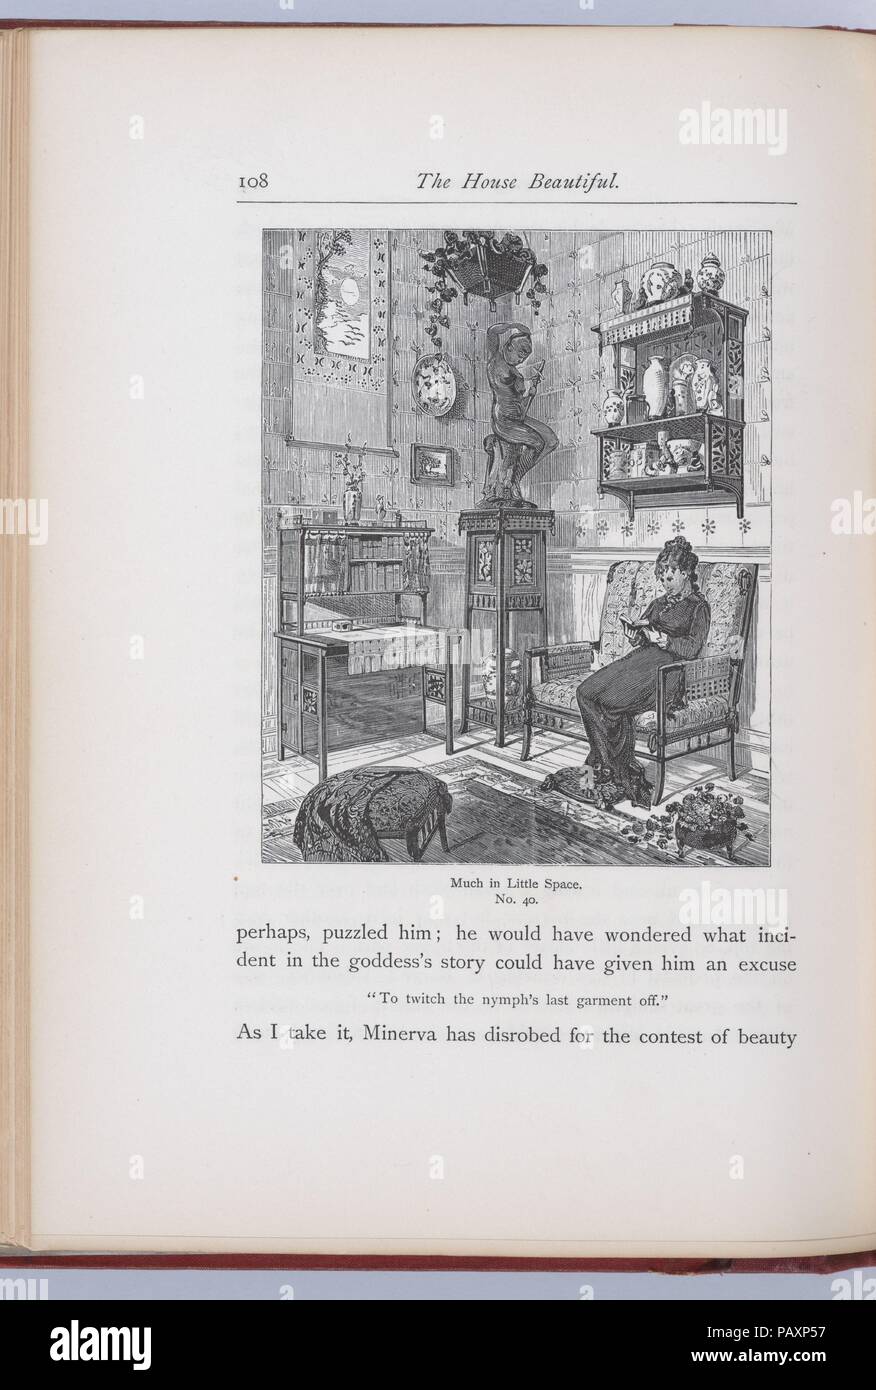 The House Beautiful, Essays on Beds and Tables, Stools and Candlesticks. Artist: Walter Crane (British, Liverpool 1845-1915 Horsham); W. B. Duncan (active 19th century); Francis Lathrop (American, Pacific Ocean 1849-1909); Alexandre Sandier (French, Beaune 1843-1916 Beaune); R. Riordan (active 19th century); James S. Inglis (British (born Scotland), 1852-1907); Maria Oakey Dewing (American, 1855-1927). Author: Clarence Cook (American, Dorchester, Massachusetts 1828-1900). Designer: Cover by Daniel Cottier (British, Glasgow, Scotland 1838-1891 Jacksonville, Florida). Dimensions: 10 1/16 x 7 7/8 Stock Photo